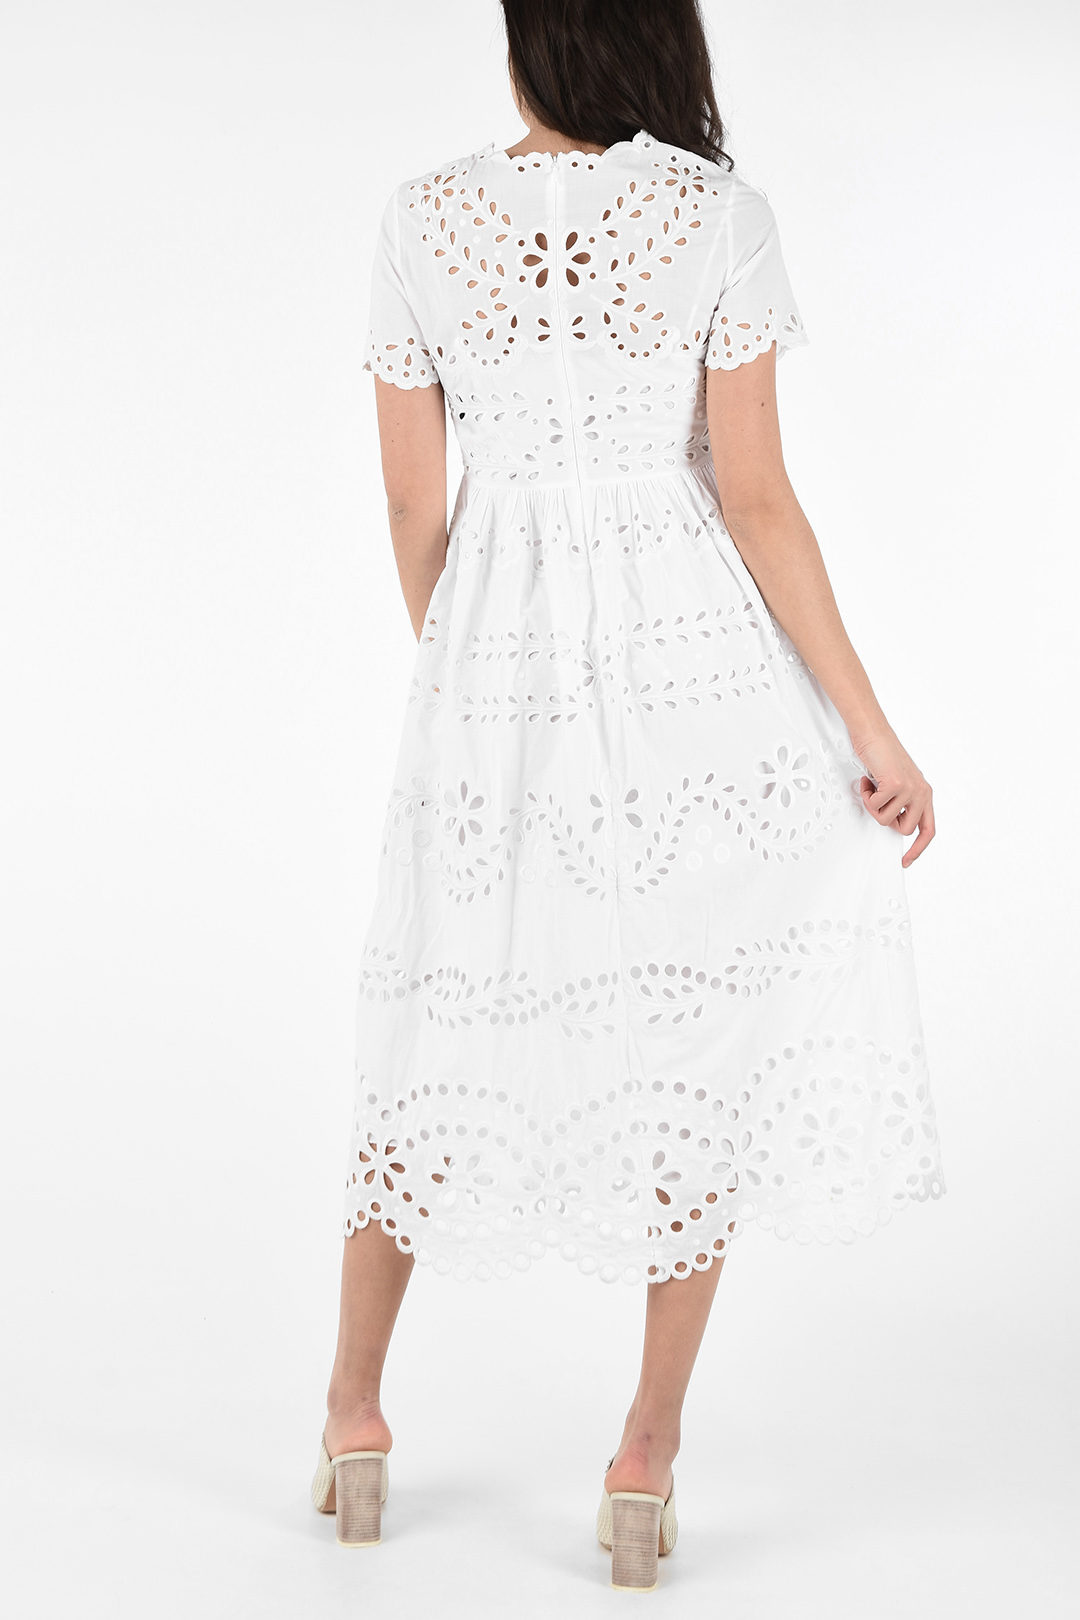 Red Valentino Cotton Floral Embroidered Summer Dress with Petticoat ...